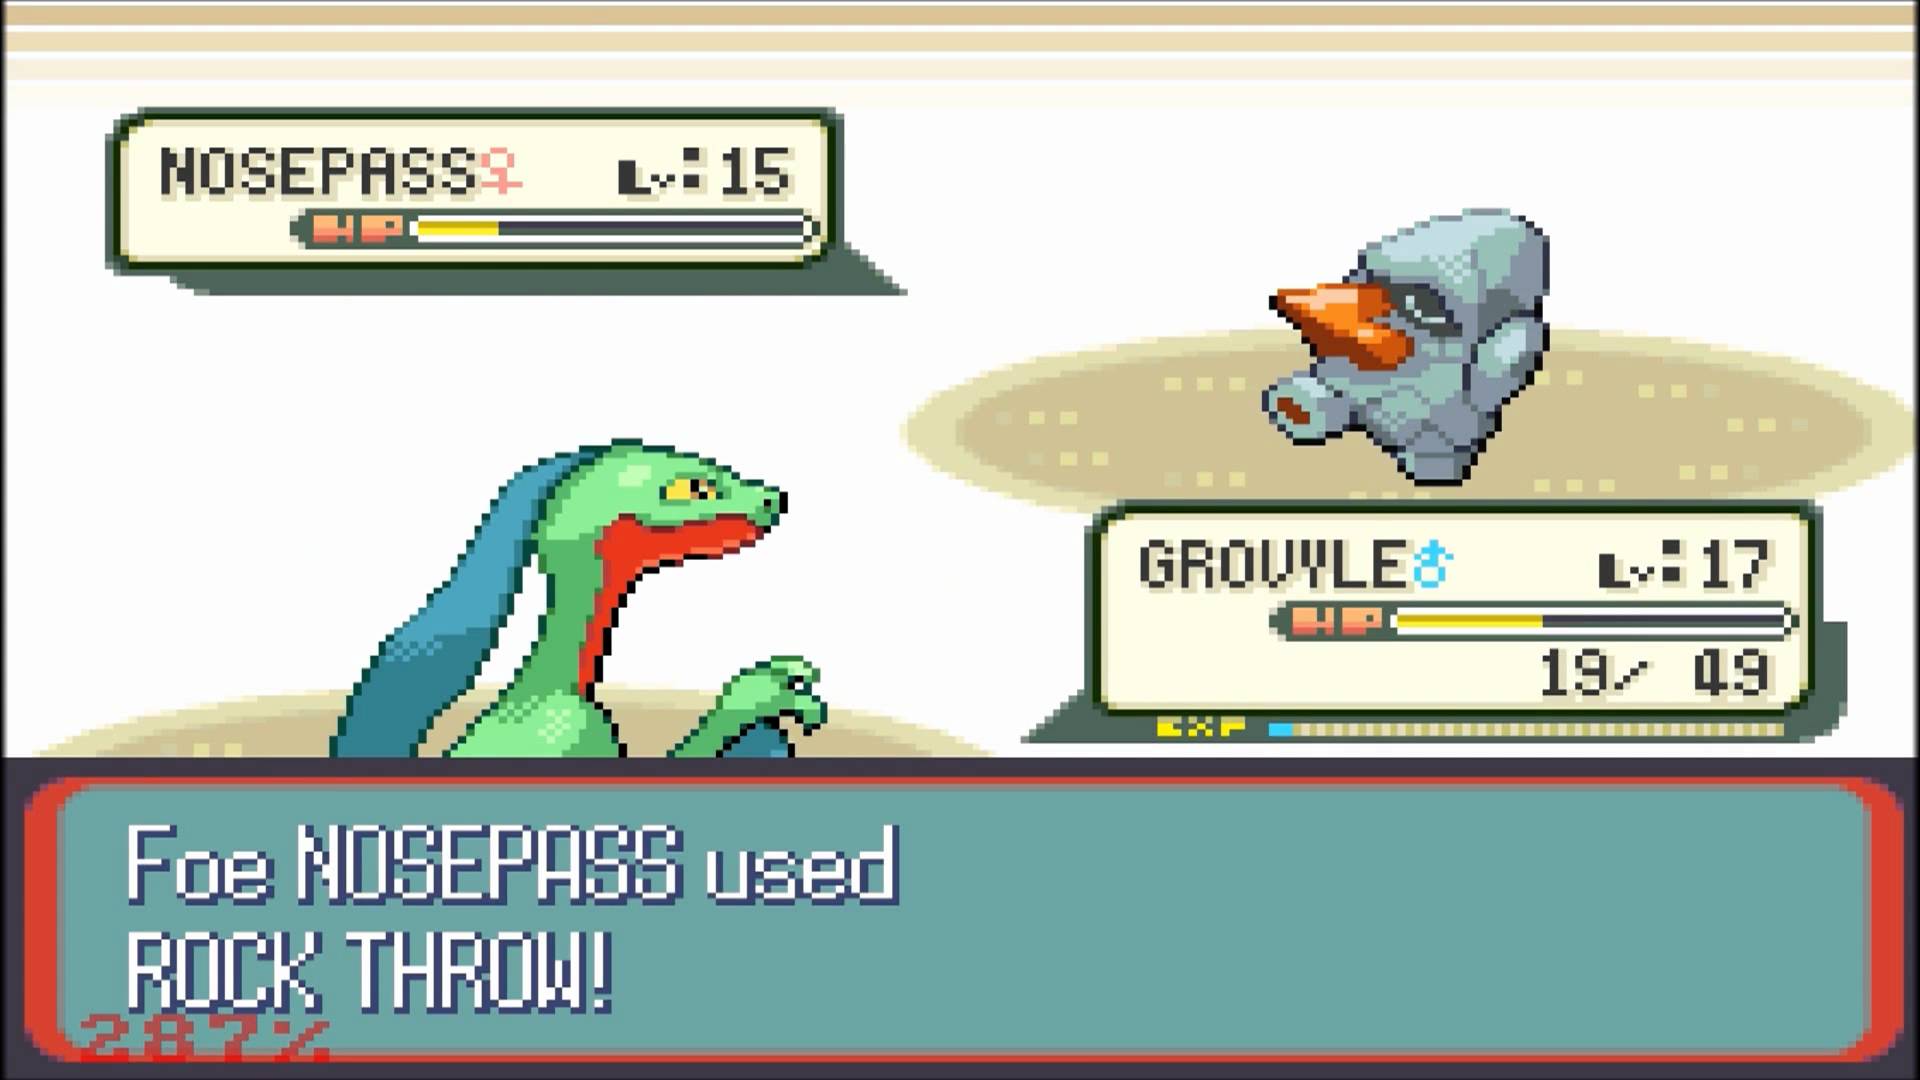 A Nuzlocke run puts a spin on the typical Pokemon game by adding permadeath. A battle between Nosepass and Grovyle can end with the player never getting to use their Pokemon again.